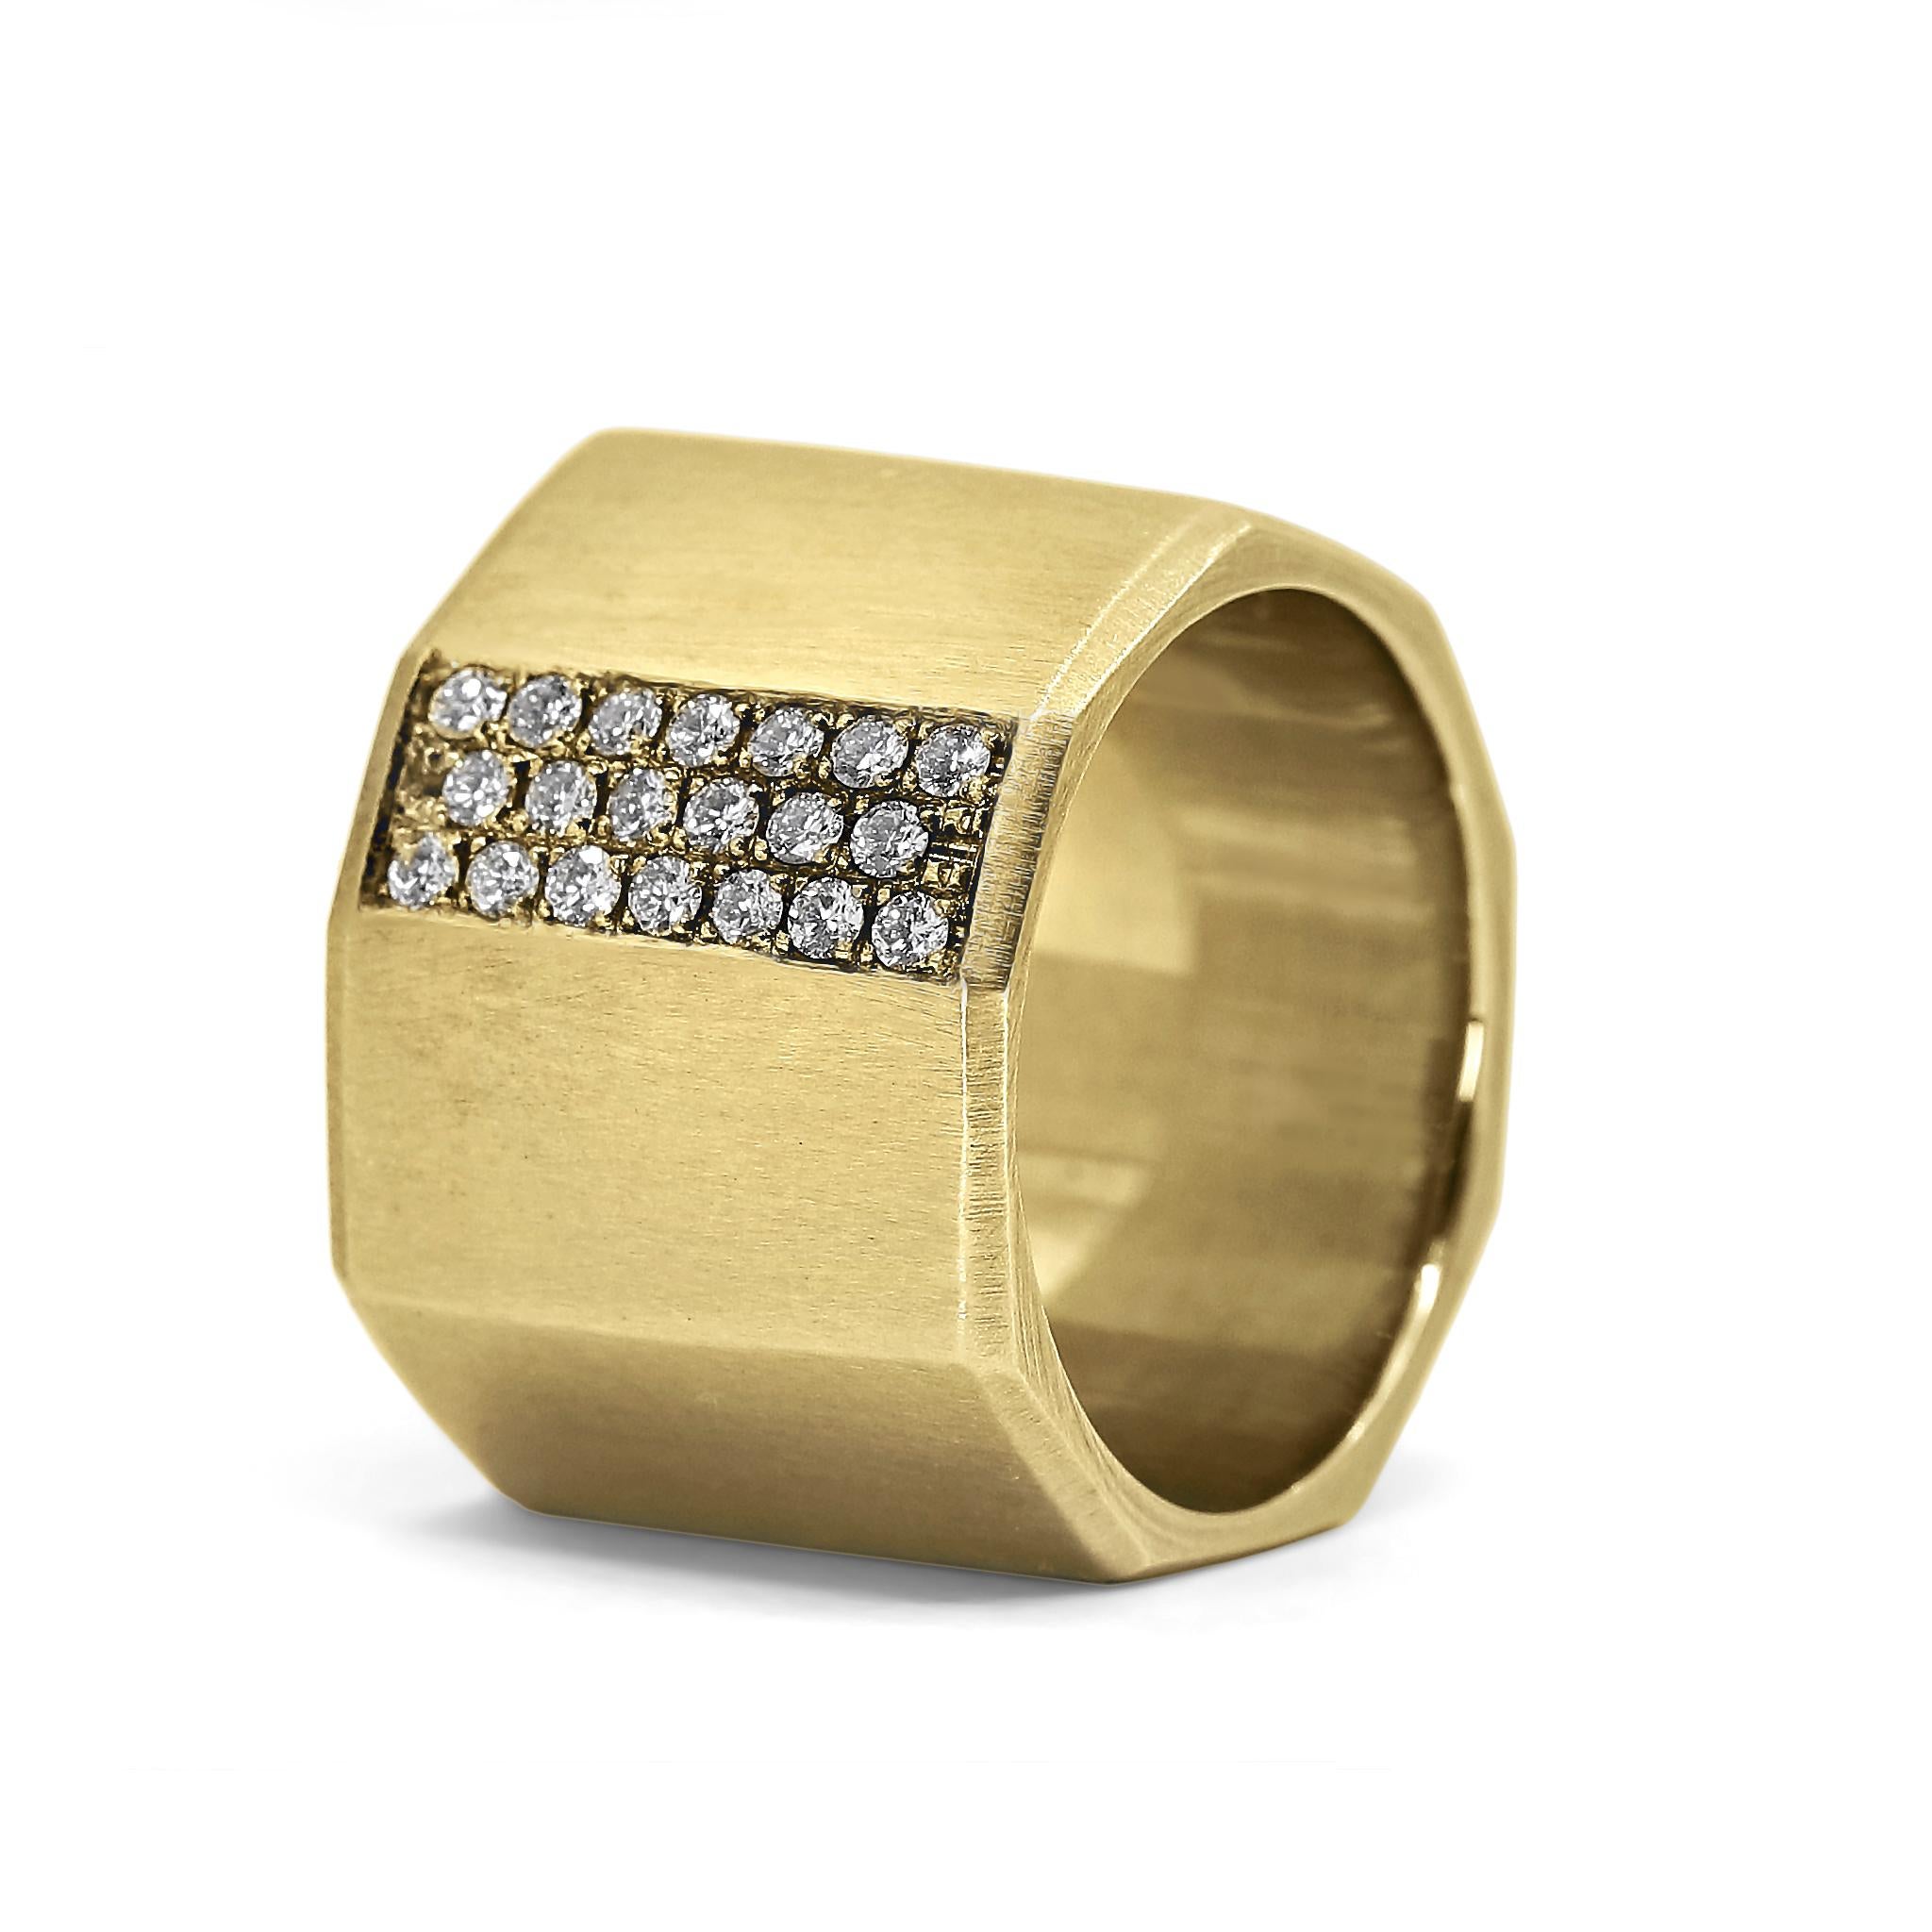 Facet Bolt Ring handcrafted by jewelry maker Lisa Ziff in intricately-finished 10k yellow gold showcasing twenty vibrant round brilliant-cut white diamonds totaling 0.34 carats, and finished with a high-polished interior. Size 6.25 (available to